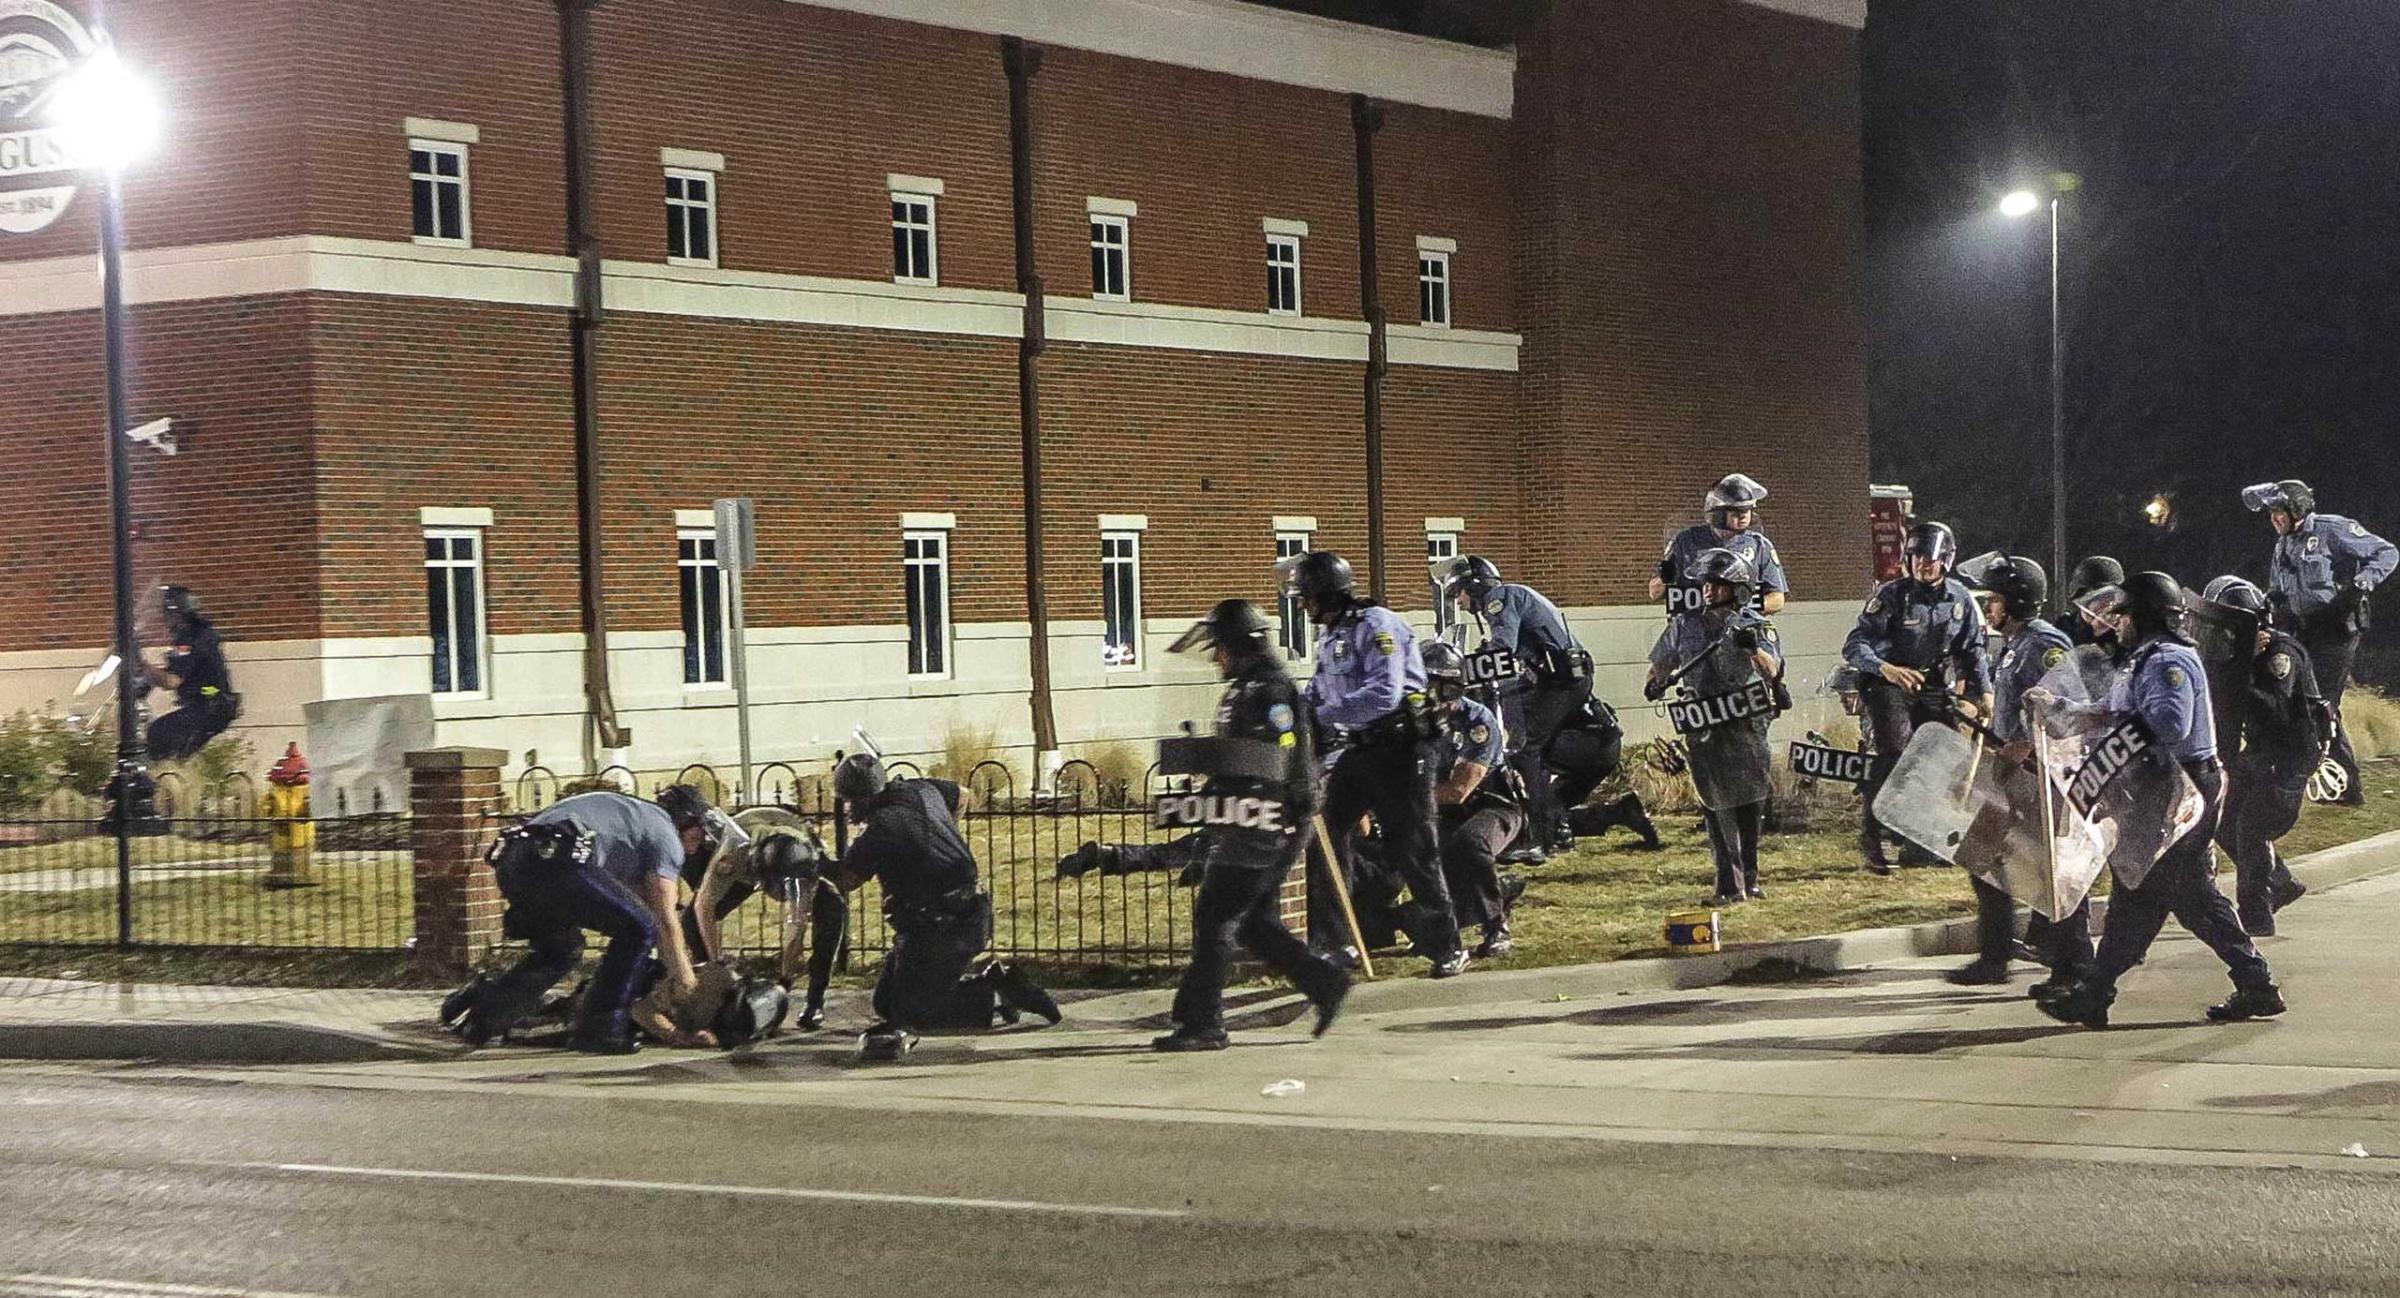 Police officers respond to a fellow officer hit by gunfire outside the Ferguson Police Headquarters in Ferguson